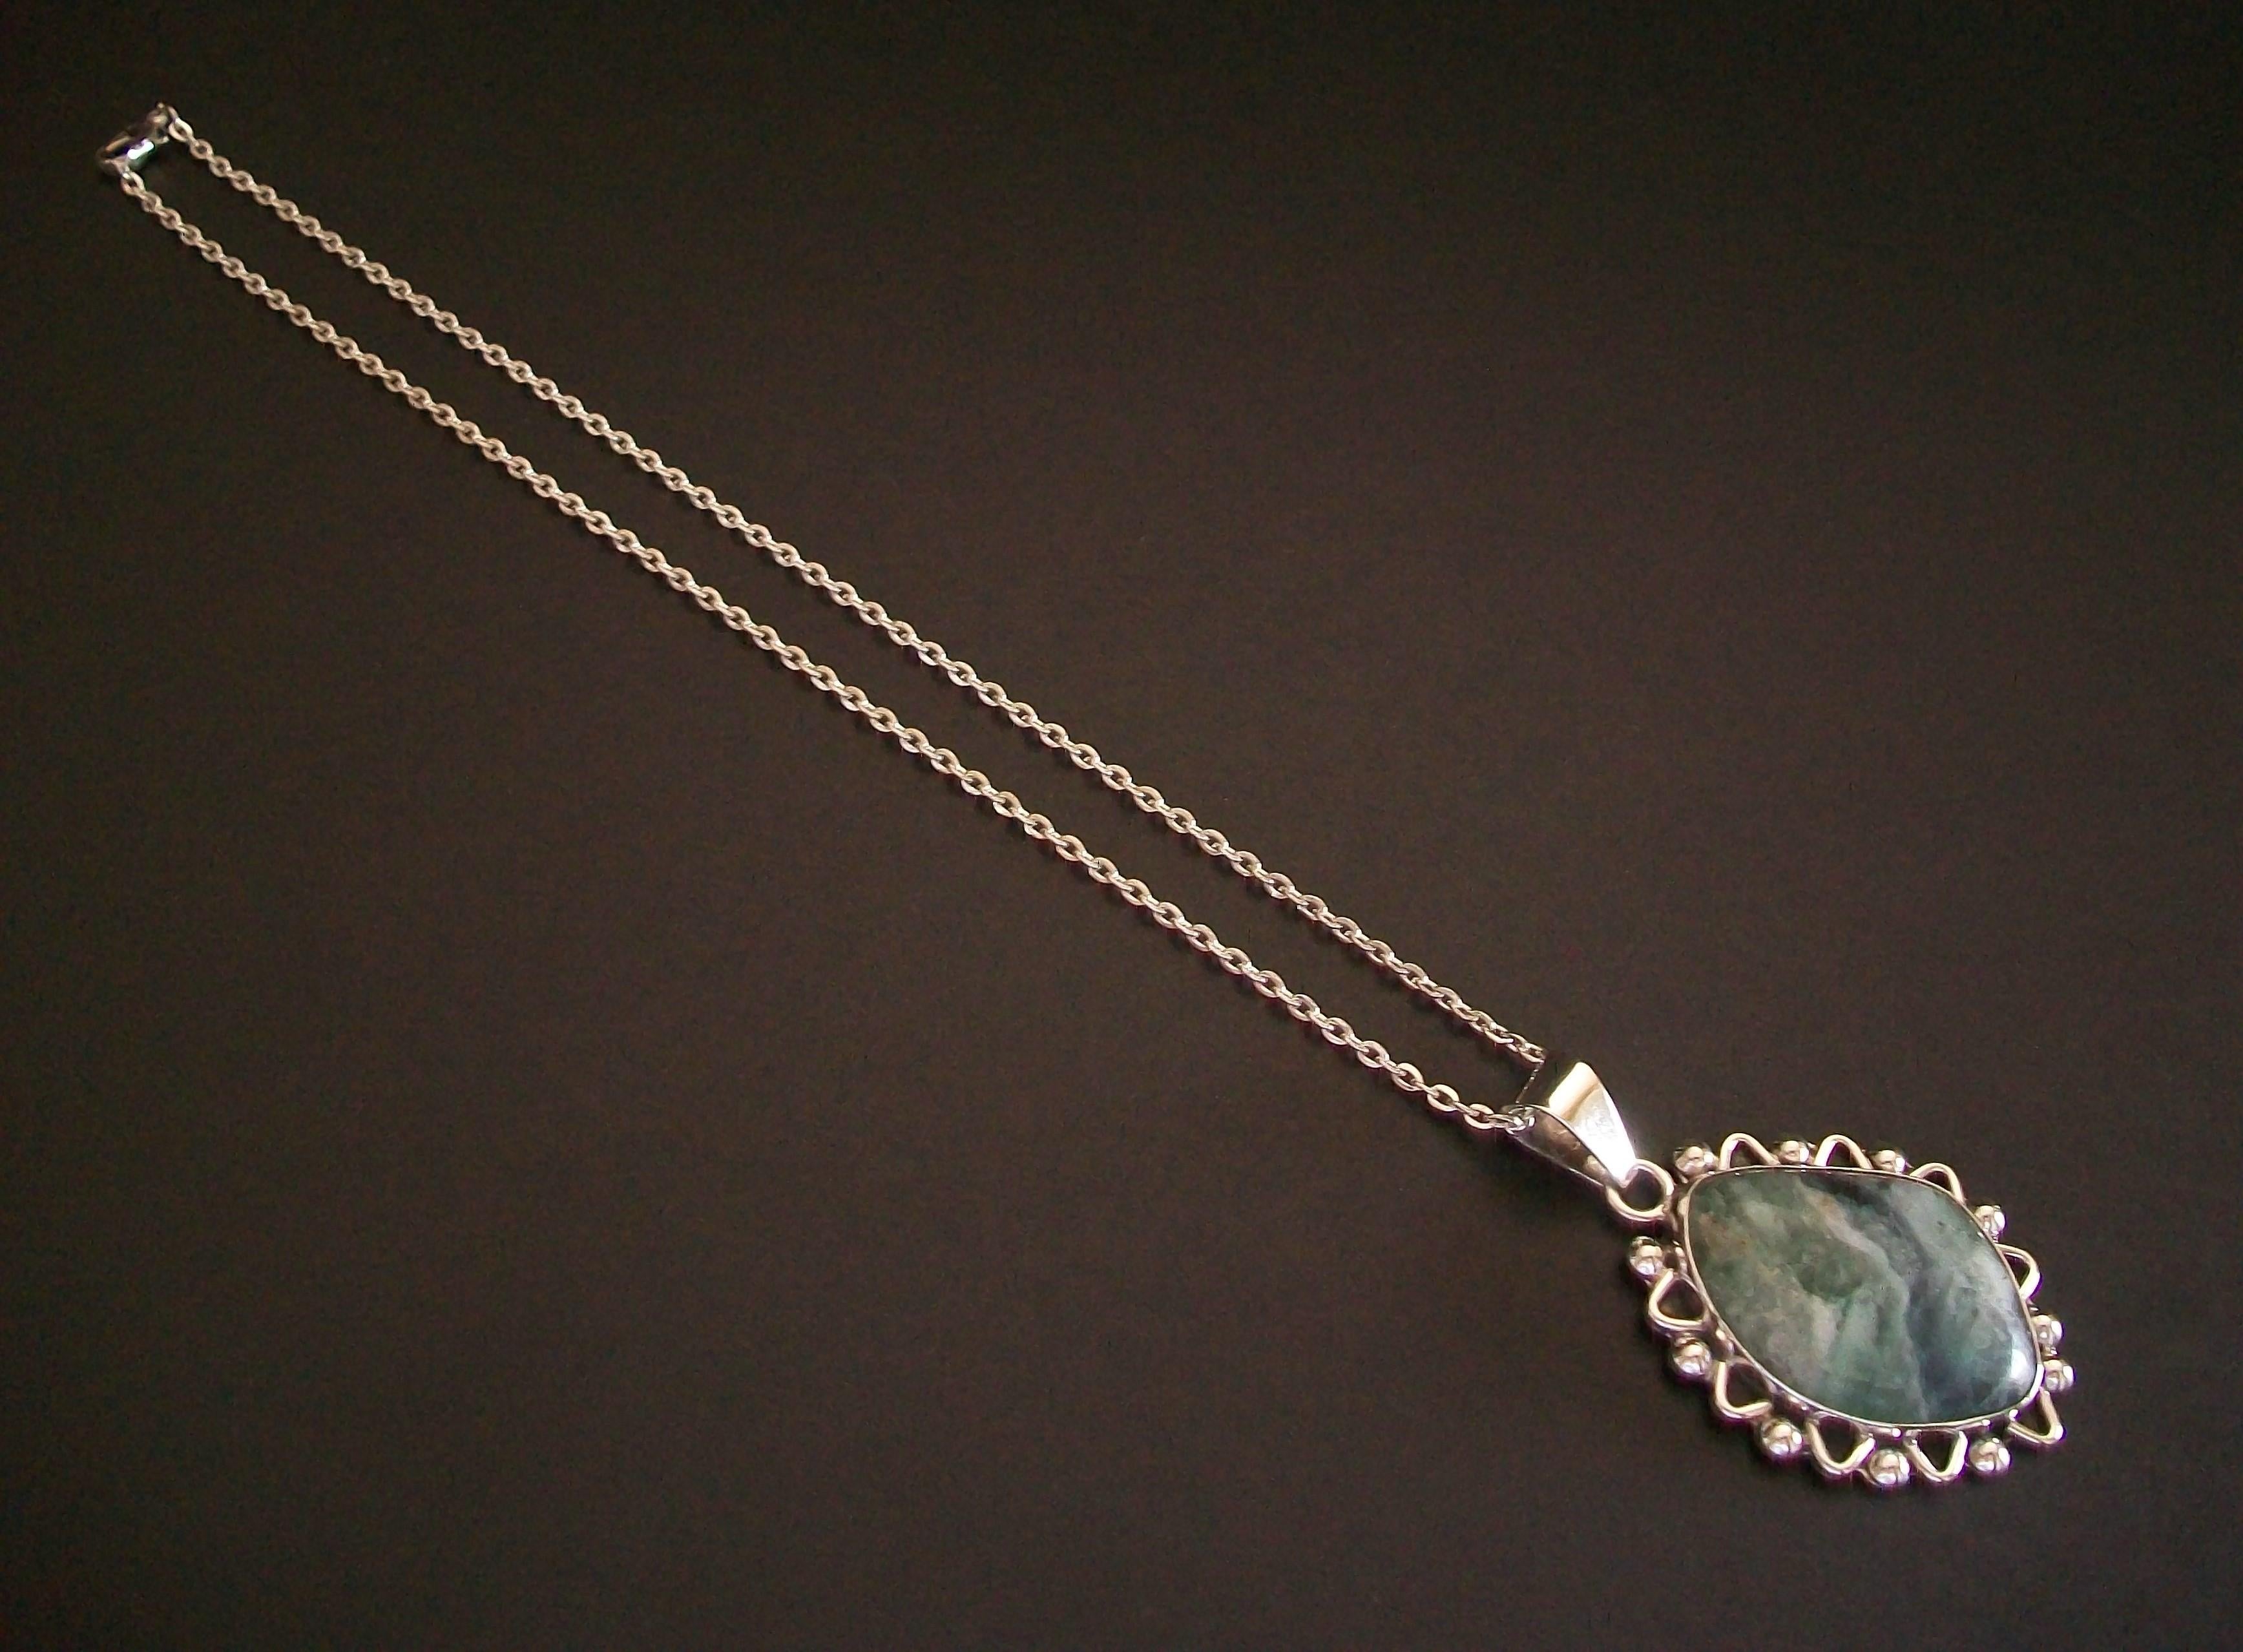 Vintage Mottled Green Jadeite & Fine Silver Pendant Necklace, Late 20th Century For Sale 2